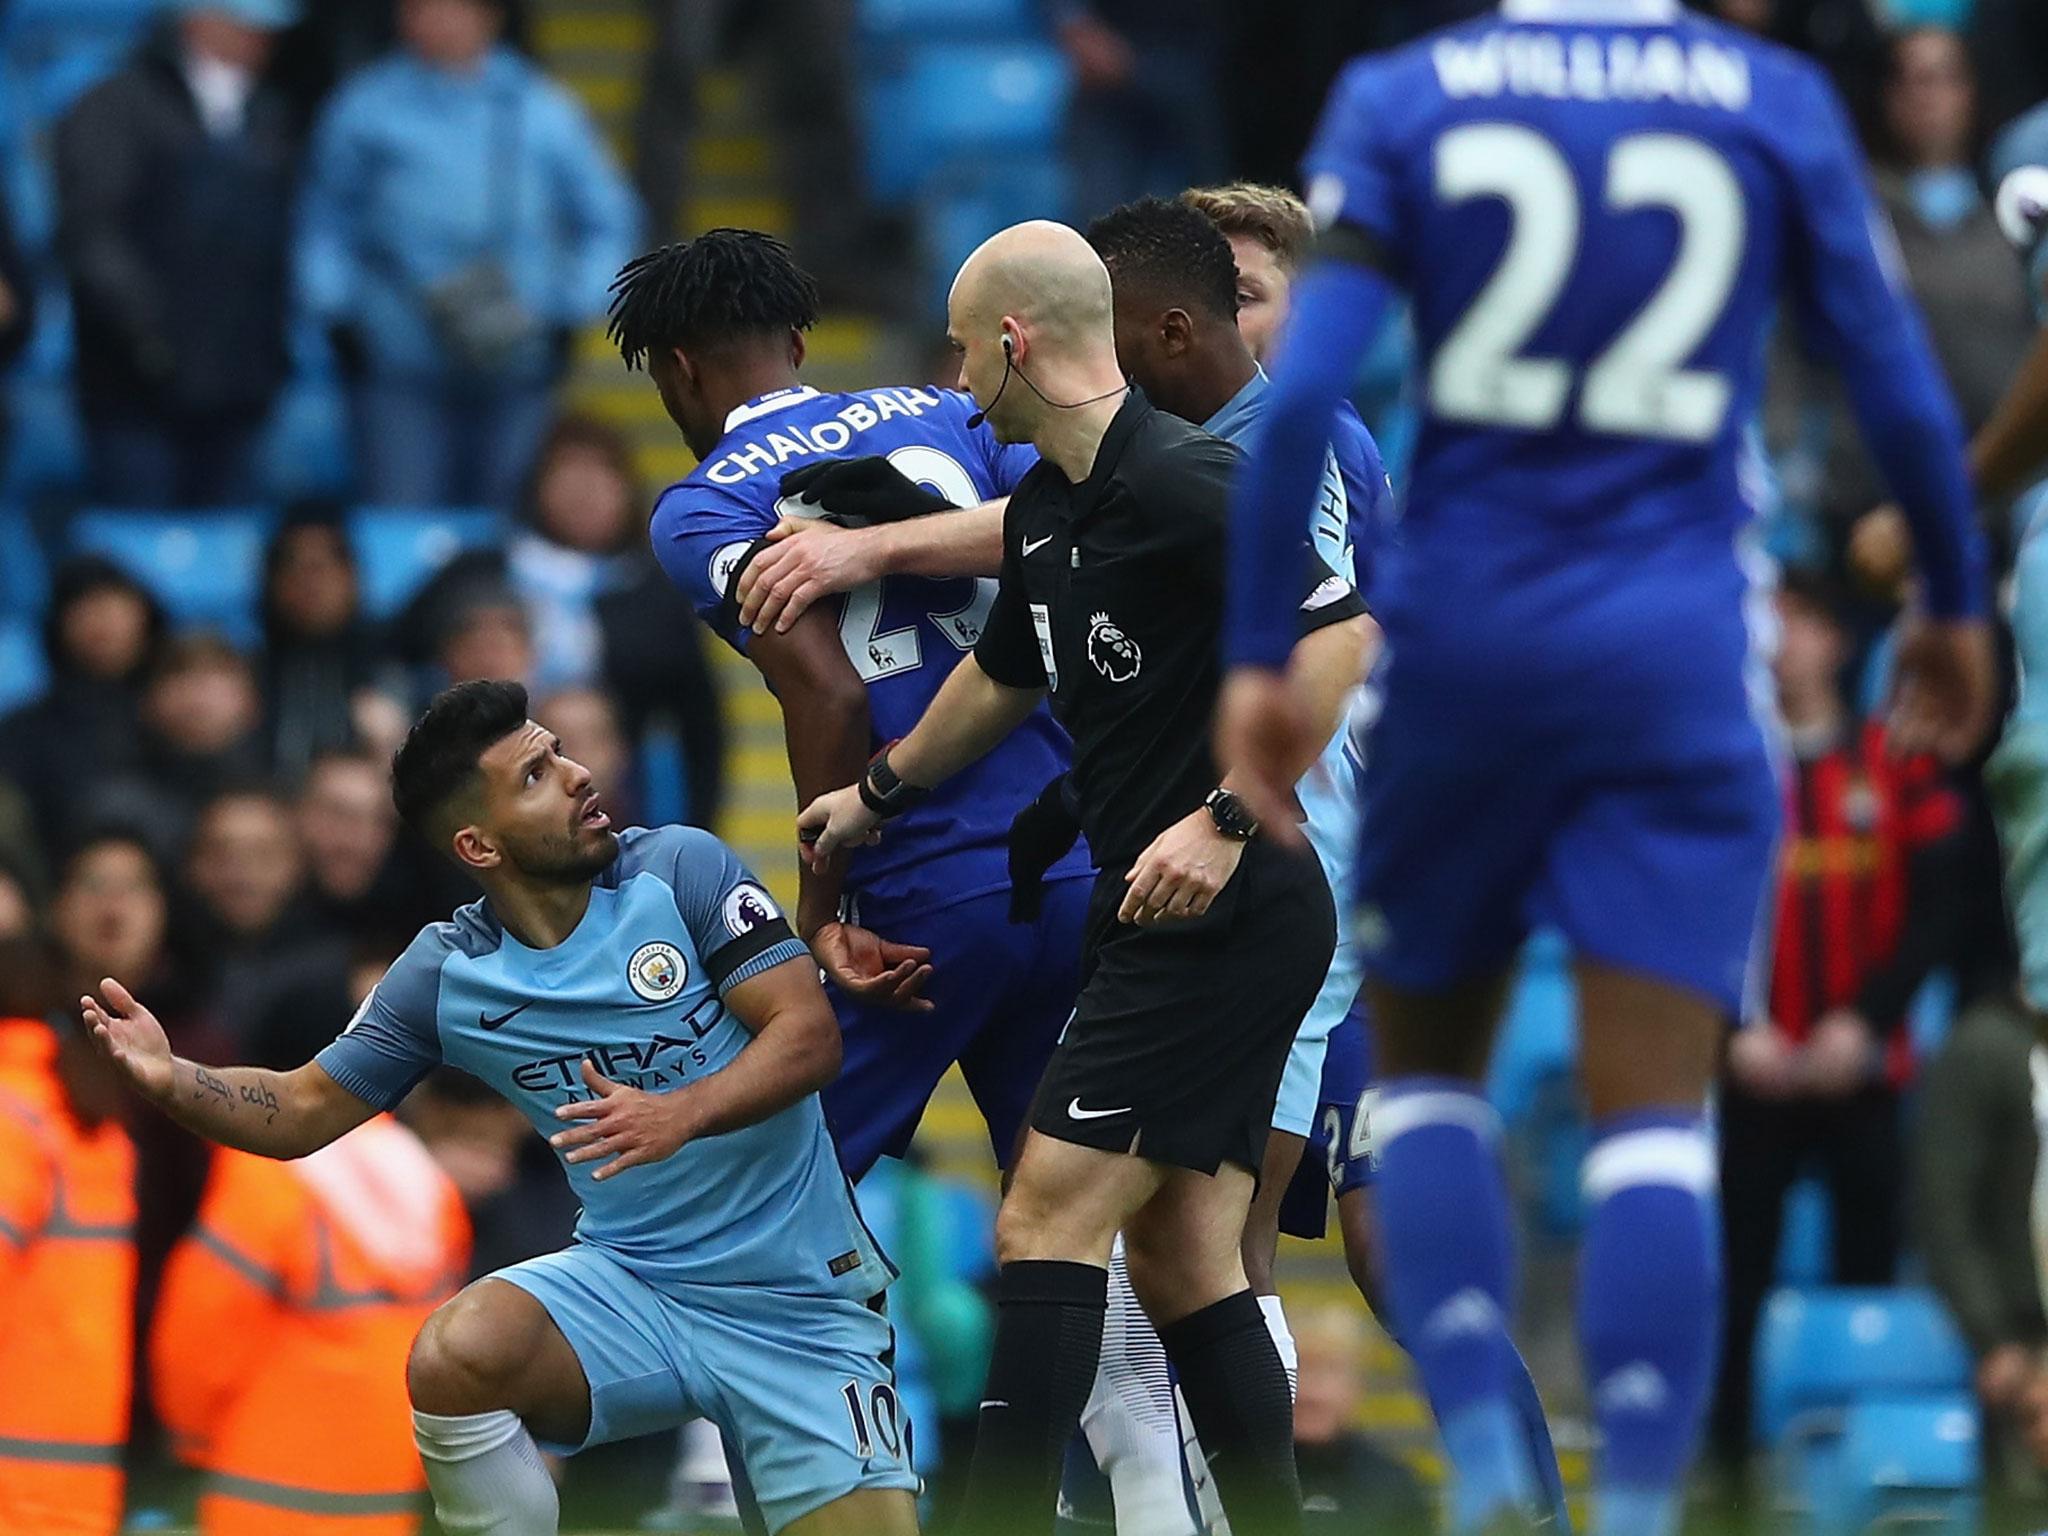 Sergio Aguero and David Luiz clashed during the game in December